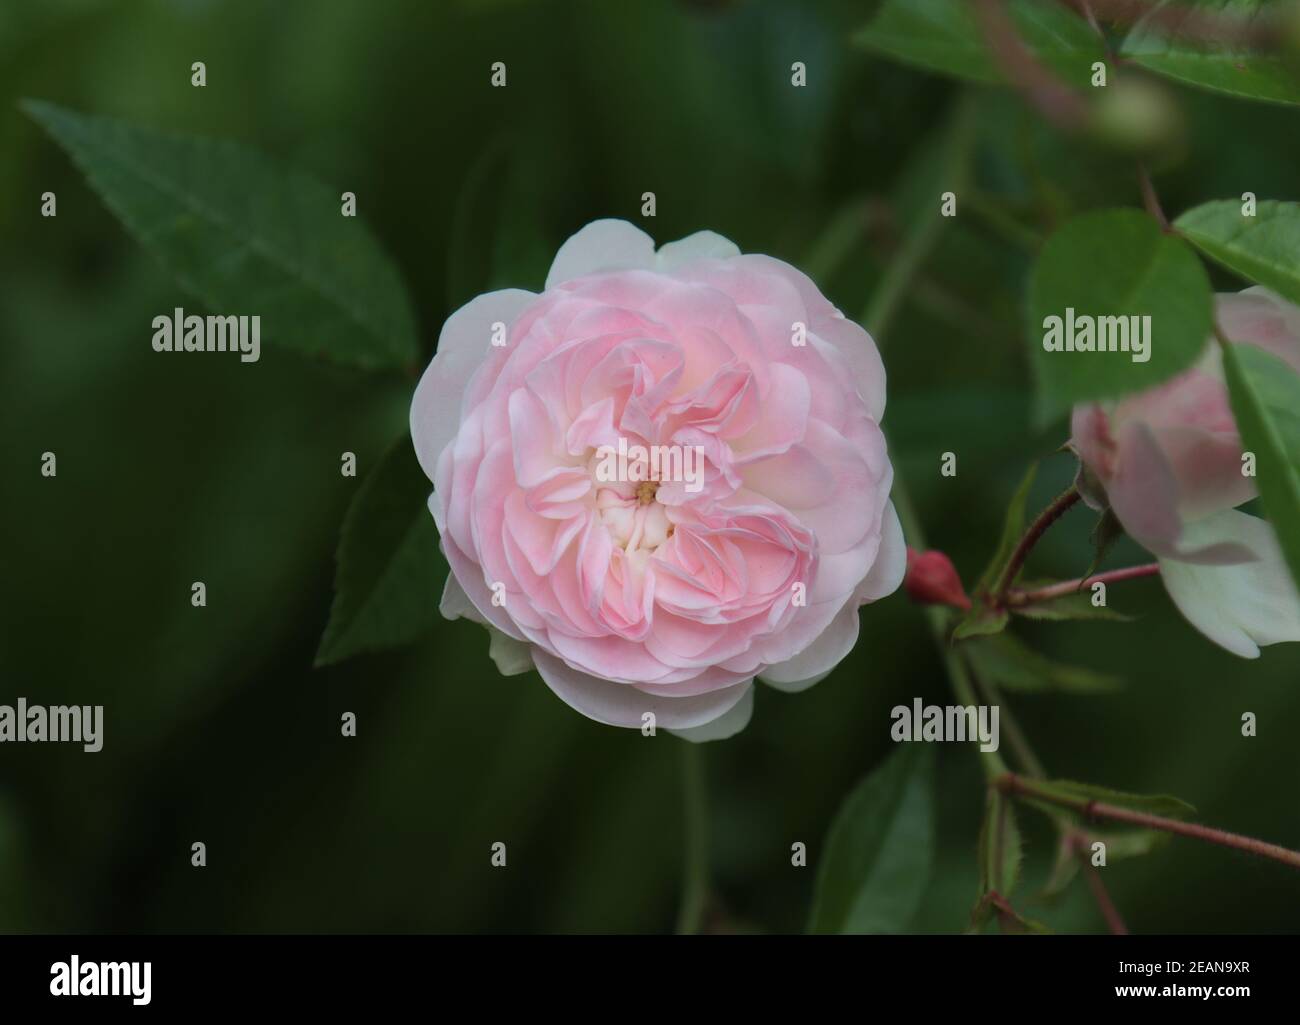 Blooming rose plant. Stock Photo